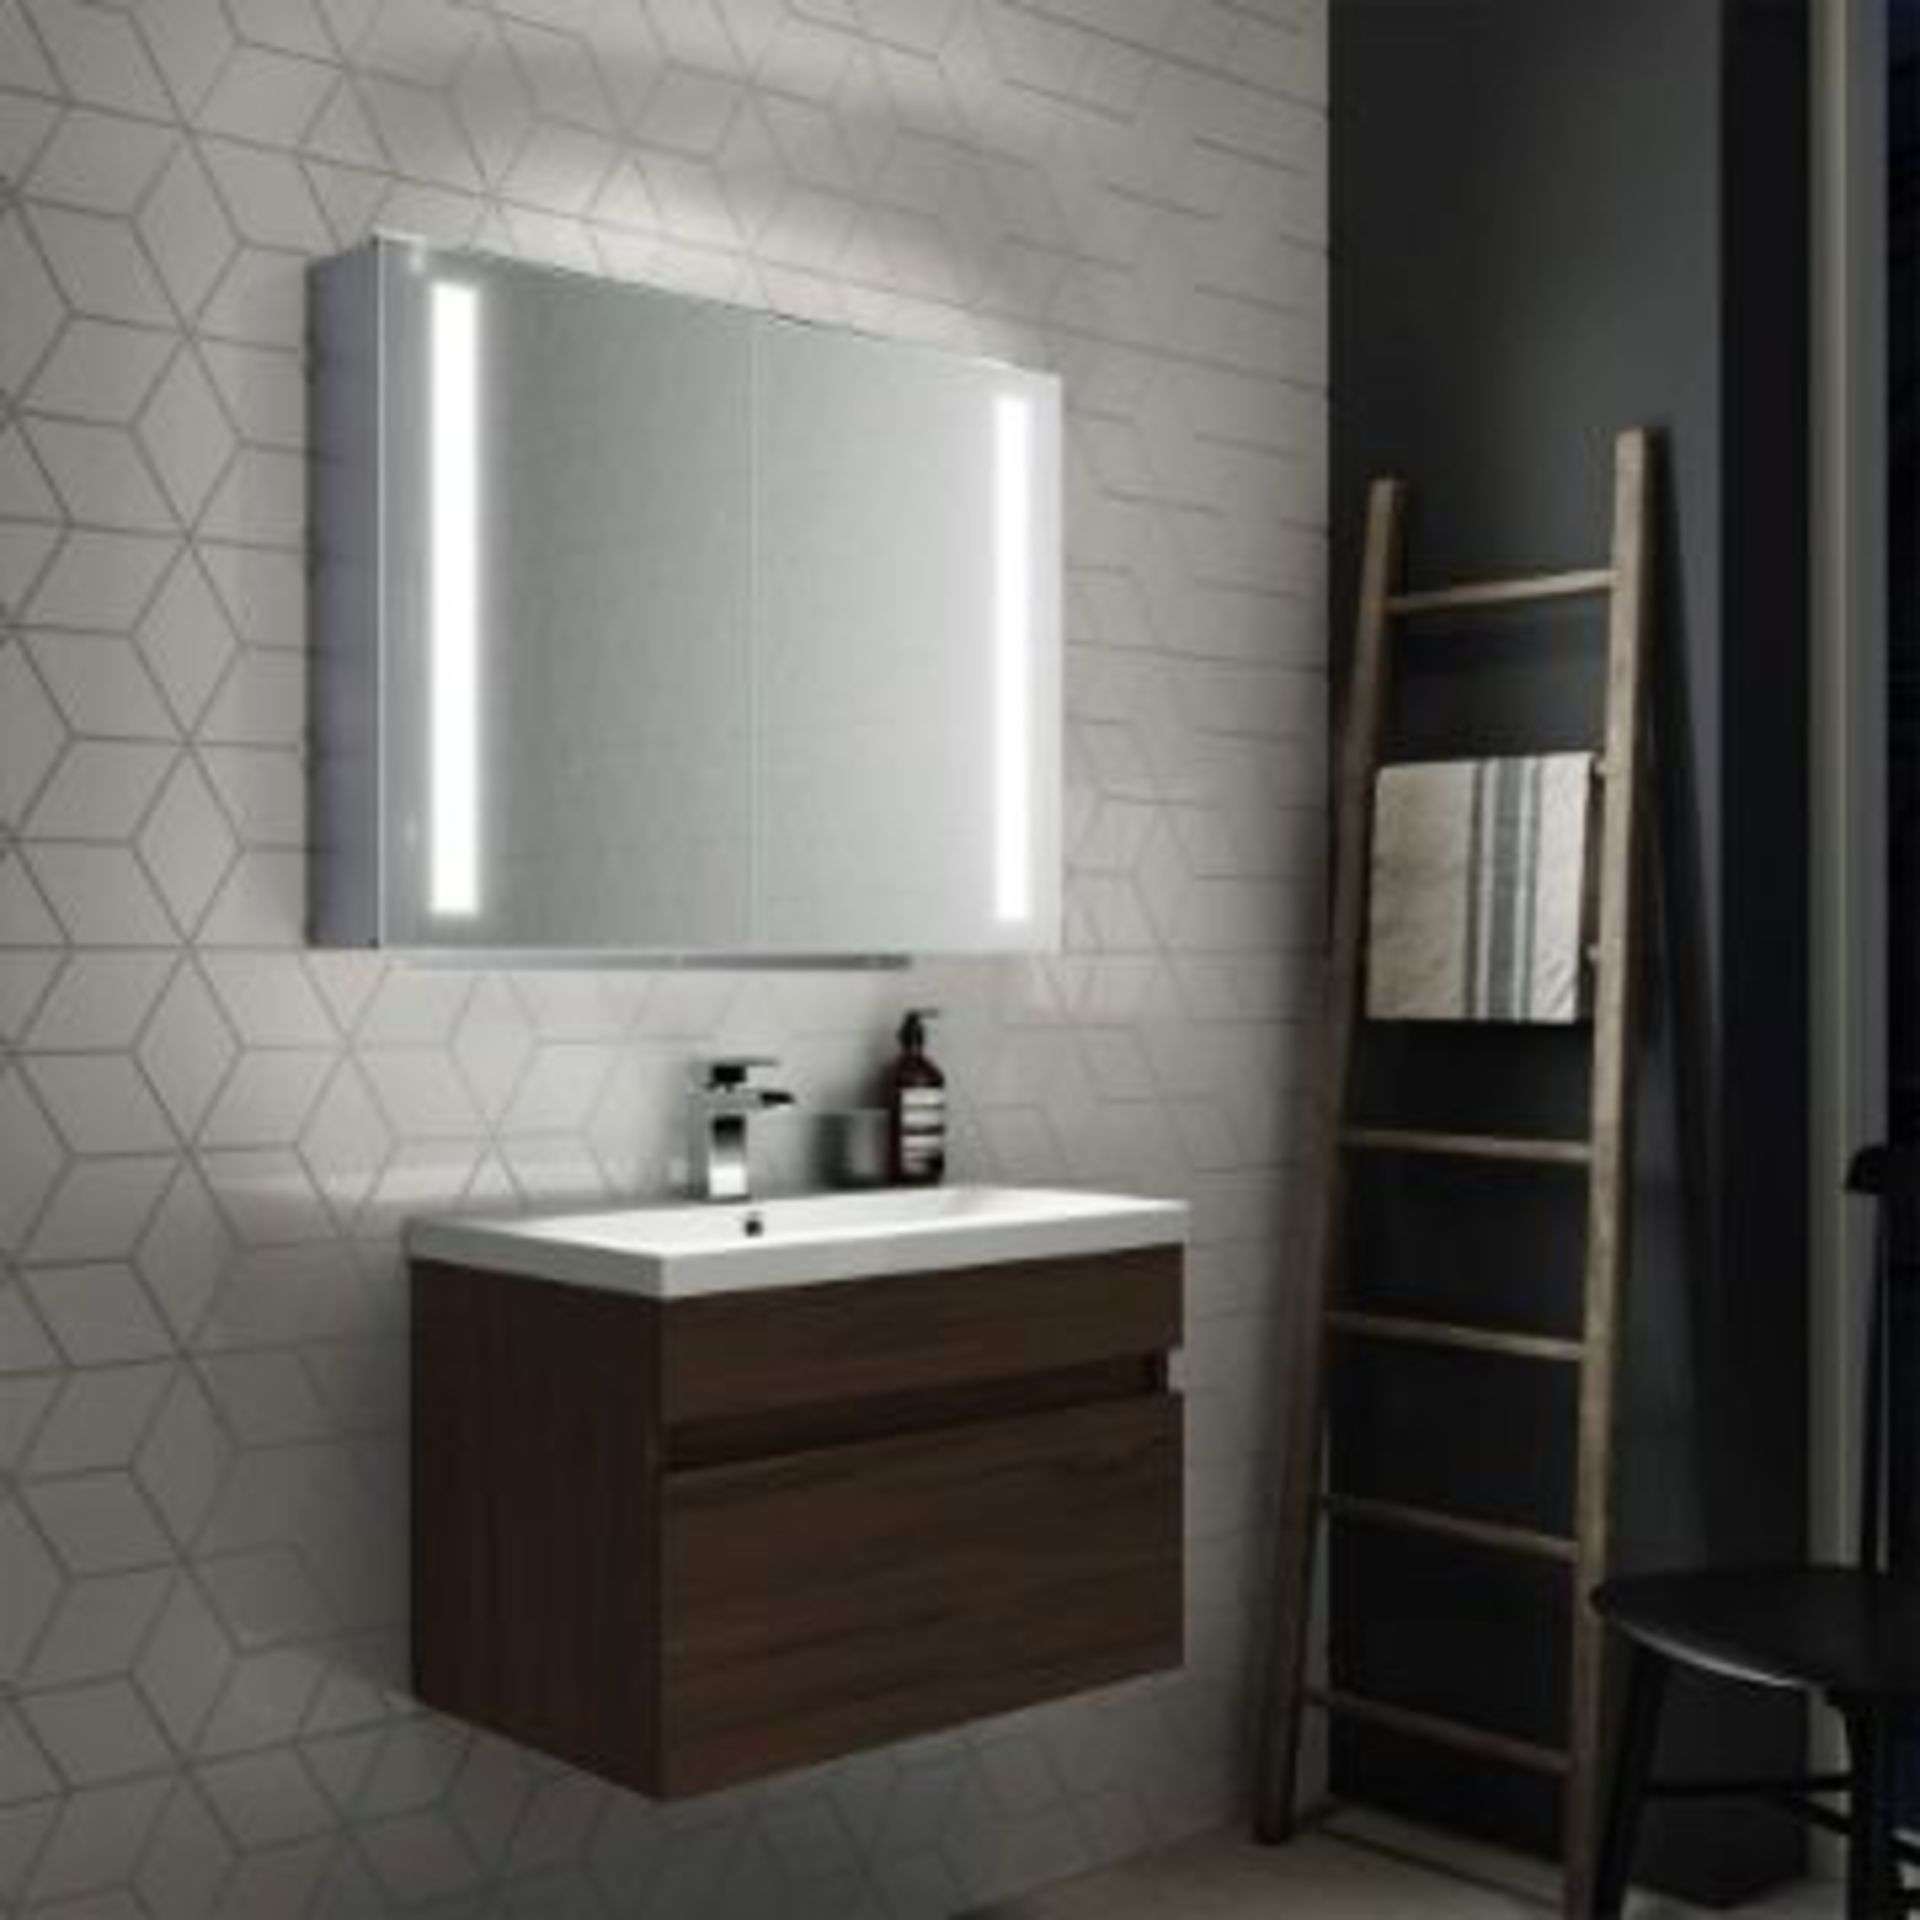 New 800 x 600 Dawn Illuminated Led Mirror Cabinet. RRP £939.99.Mc164. We Love This Mirror Cabinet As - Image 2 of 2